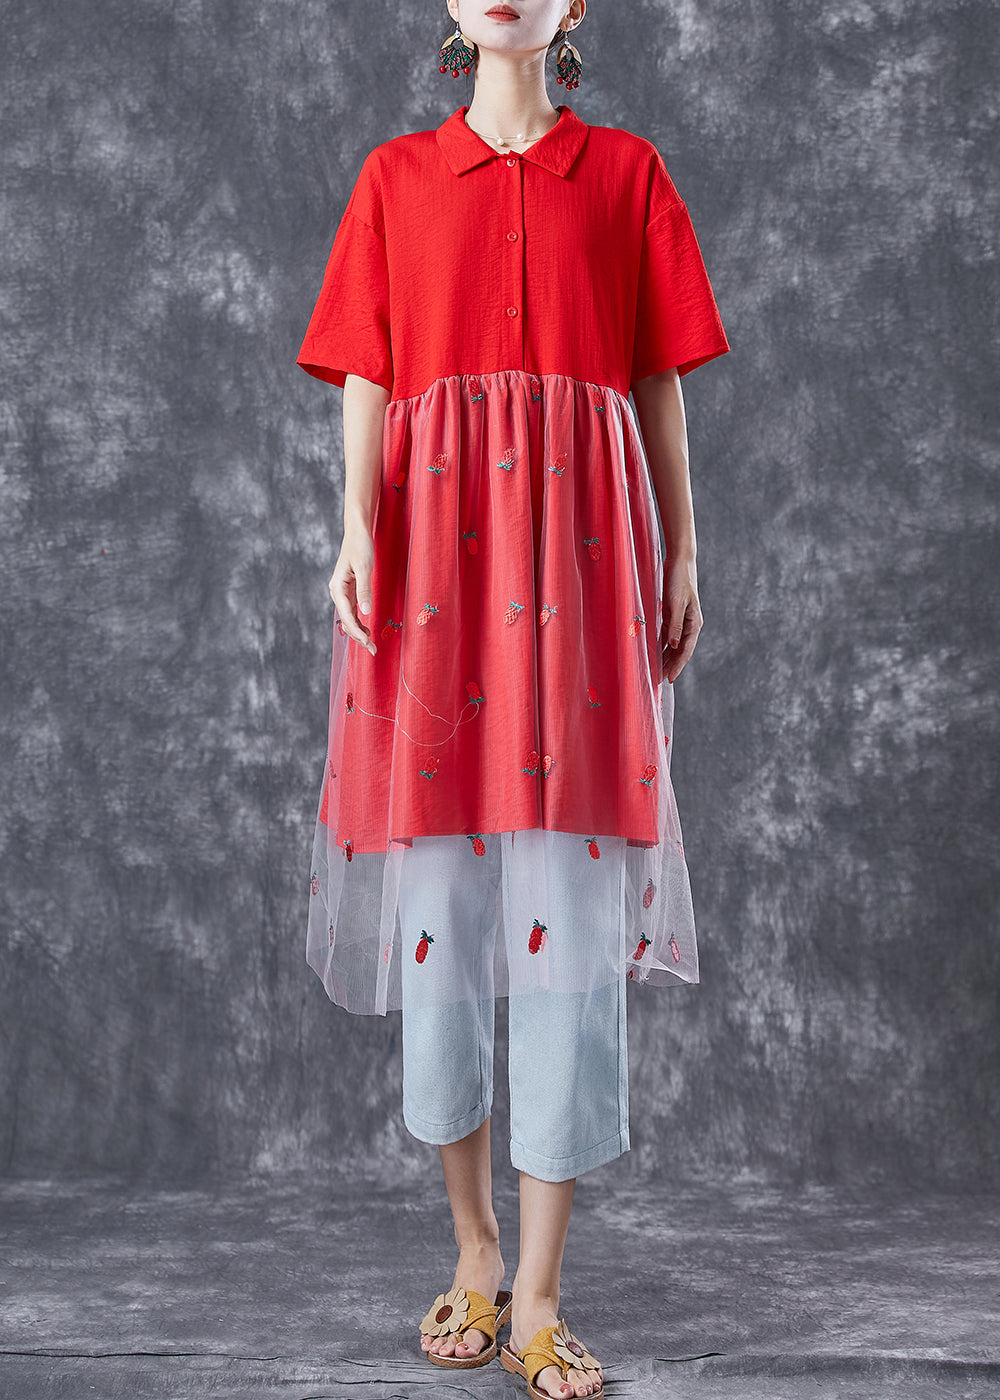 Red Patchwork Tulle Cotton Maxi Dresses Embroideried Summer LY6735 - fabuloryshop